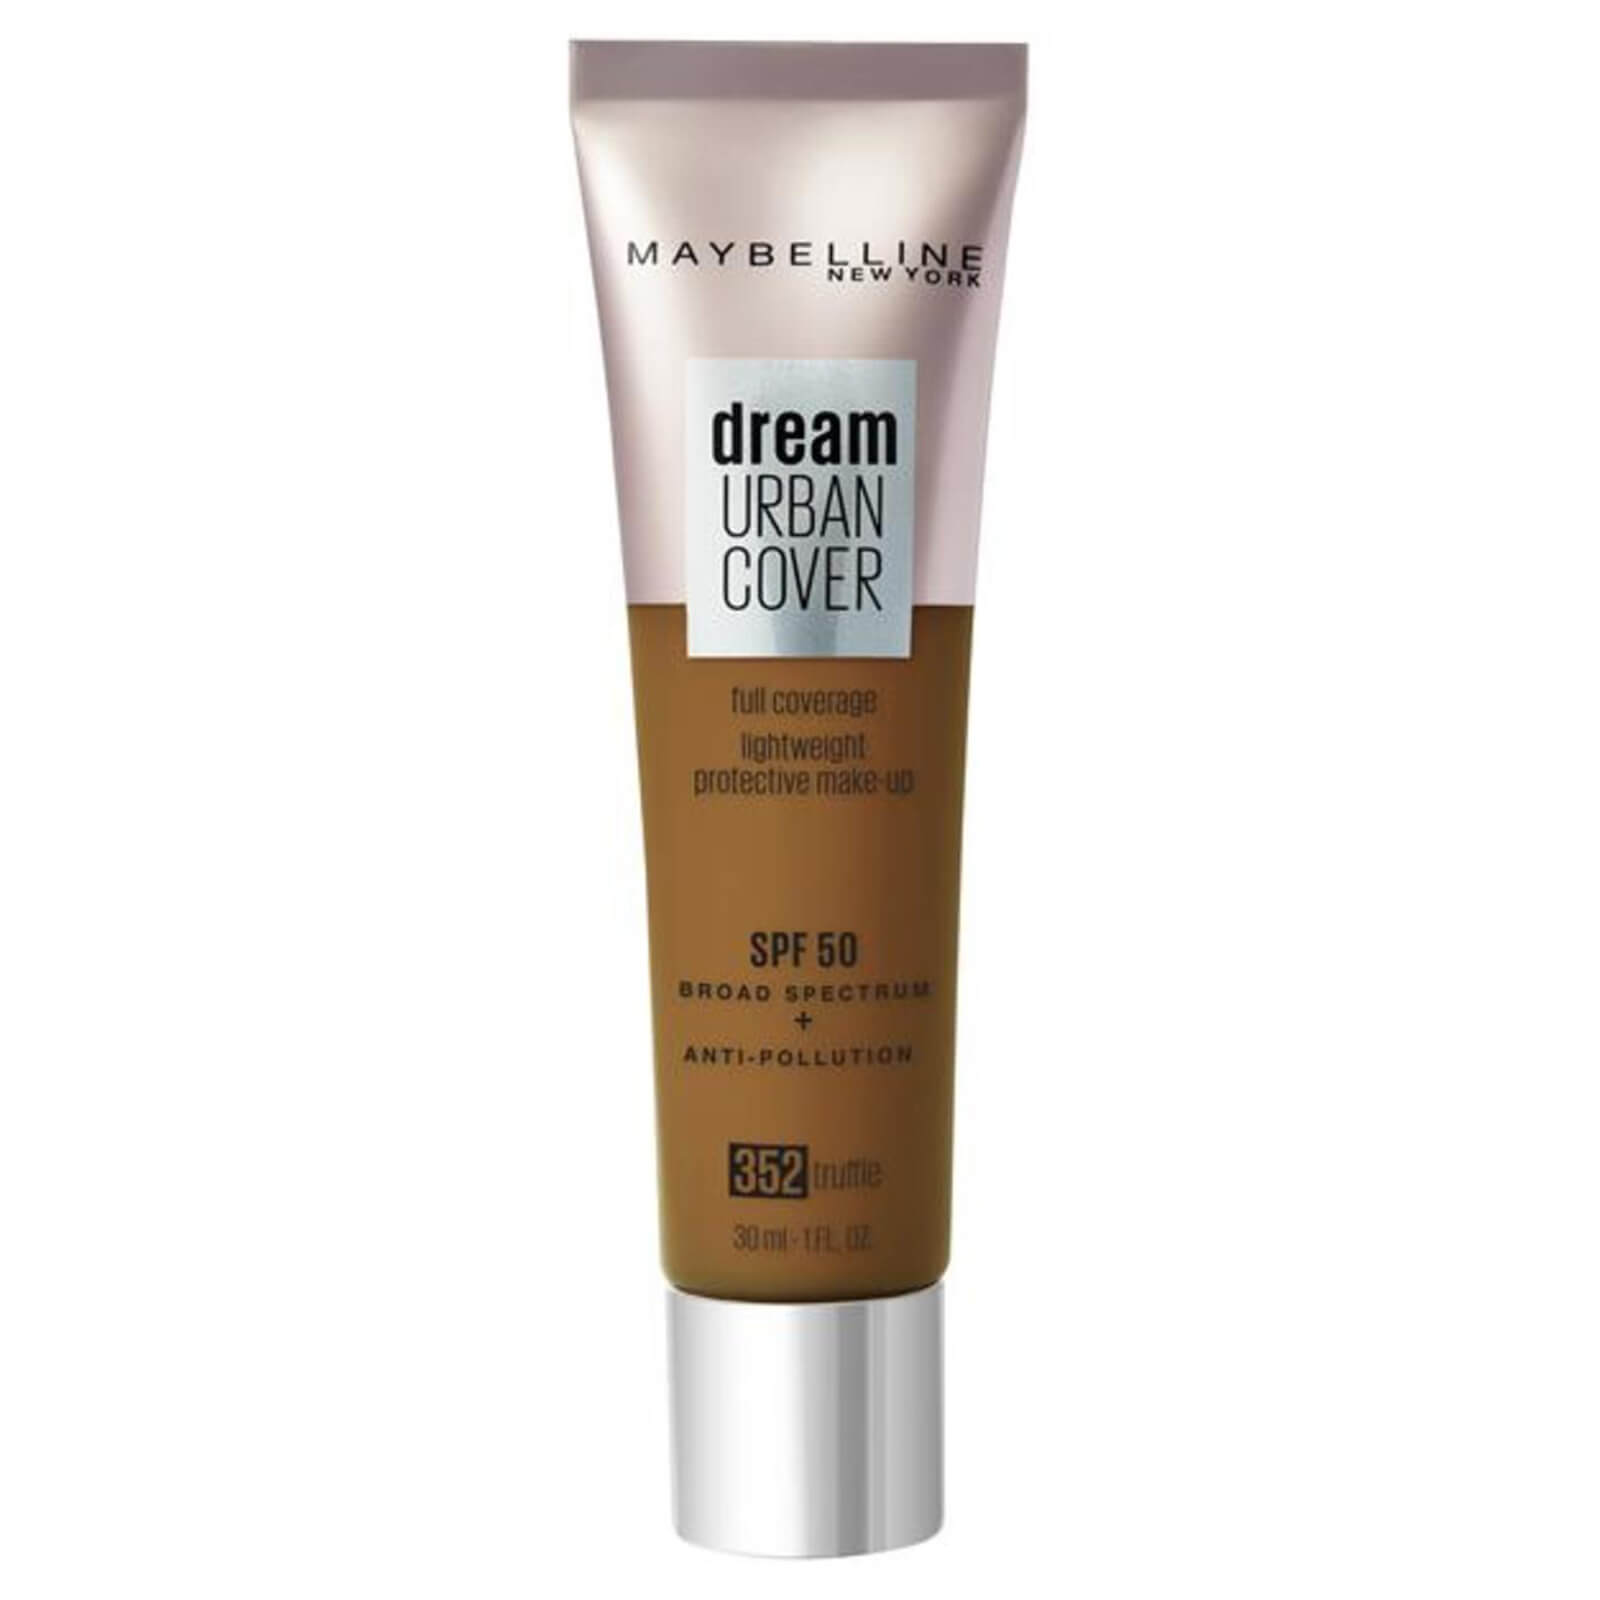 Image of Maybelline Dream Urban Cover SPF50 Foundation 121ml (Various Shades) - 352 Tuffle